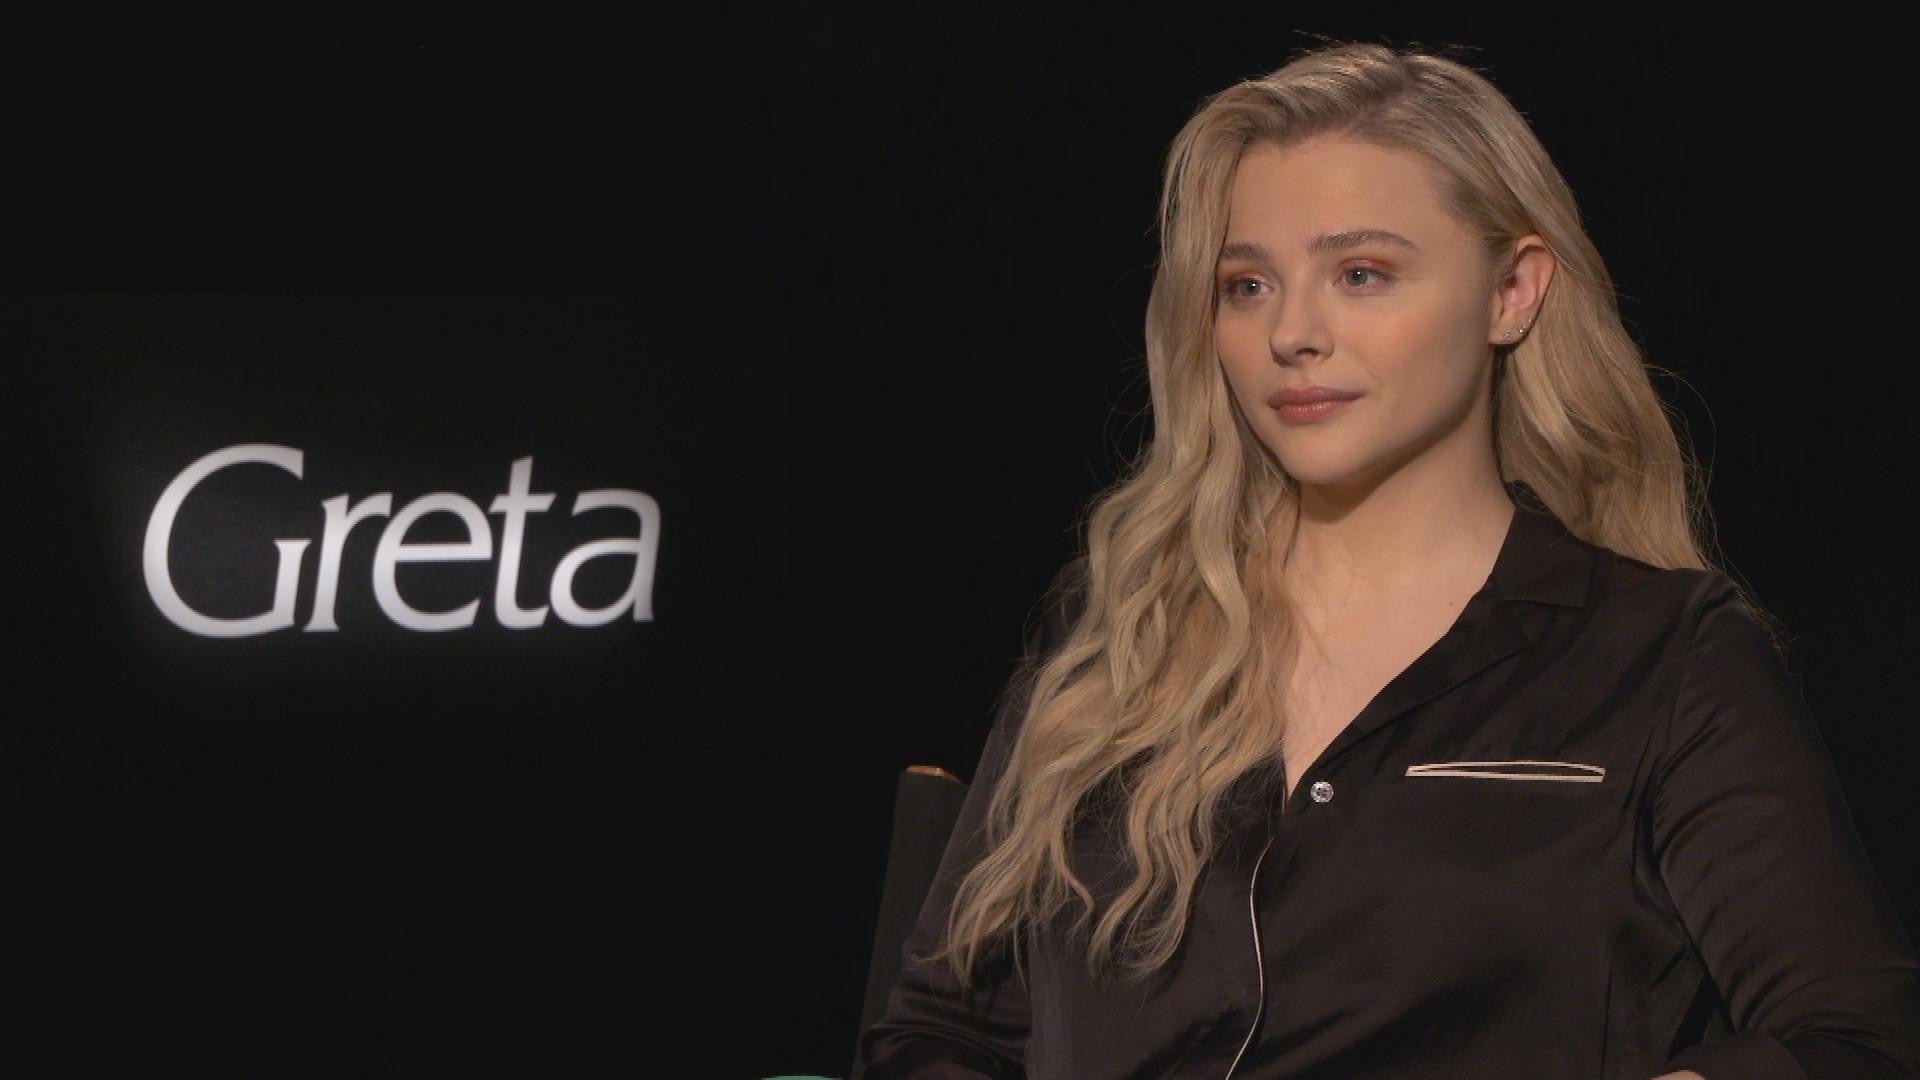 Chloe Grace Moretz on Working Out, Her Career, and Beauty Products